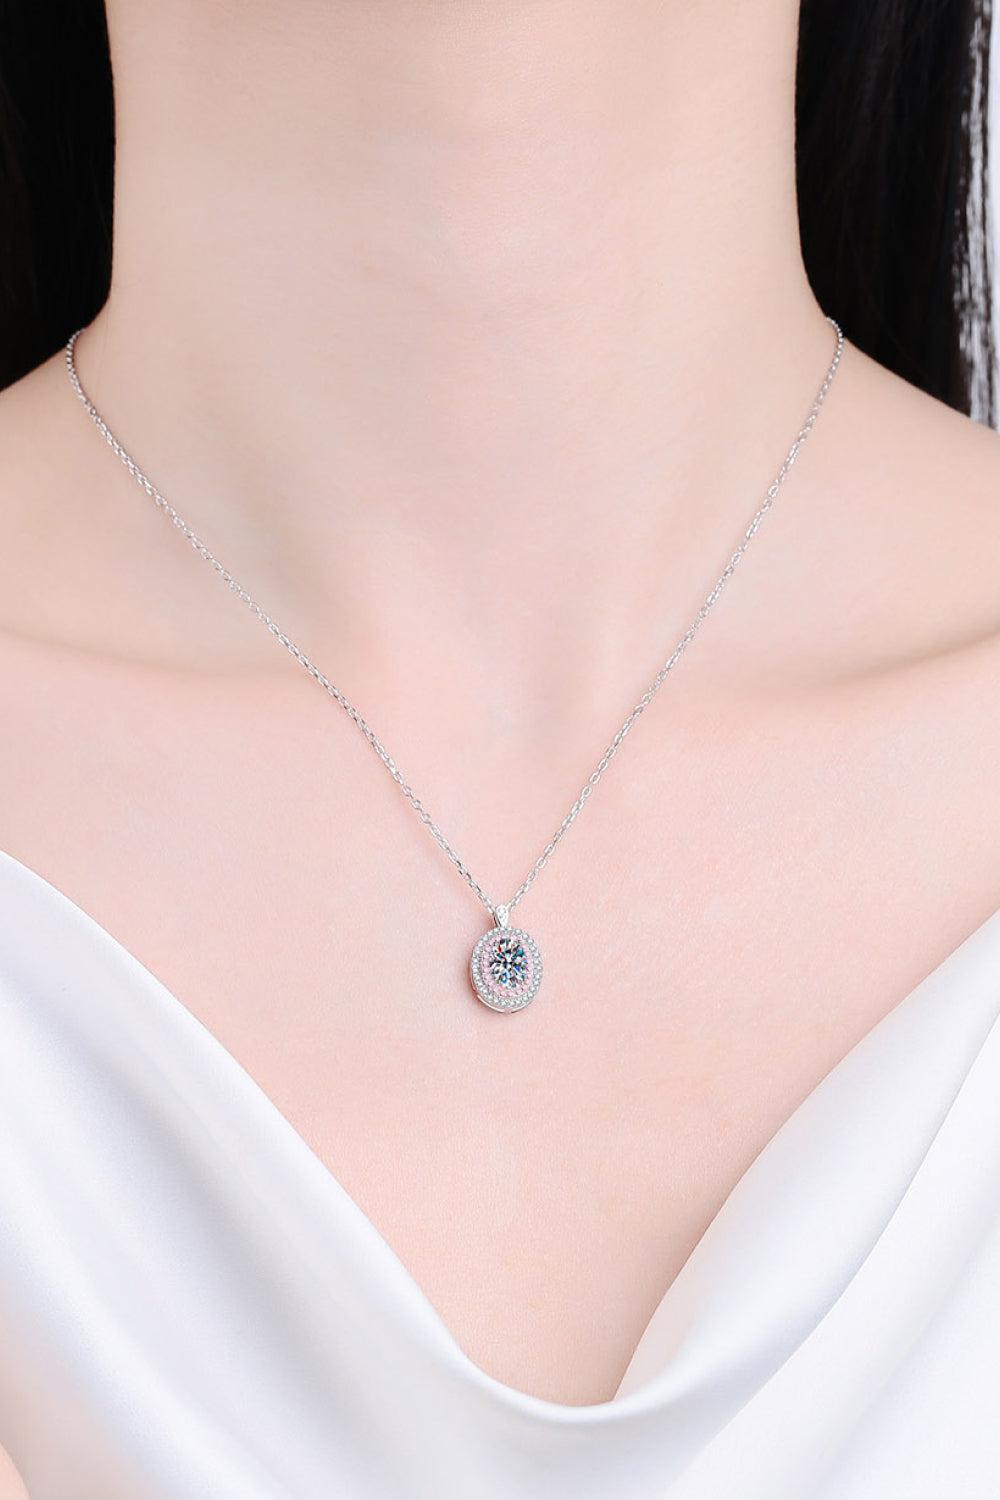 925 Sterling Silver Rhodium-Plated 1 Carat Moissanite Pendant Necklace BLUE ZONE PLANET